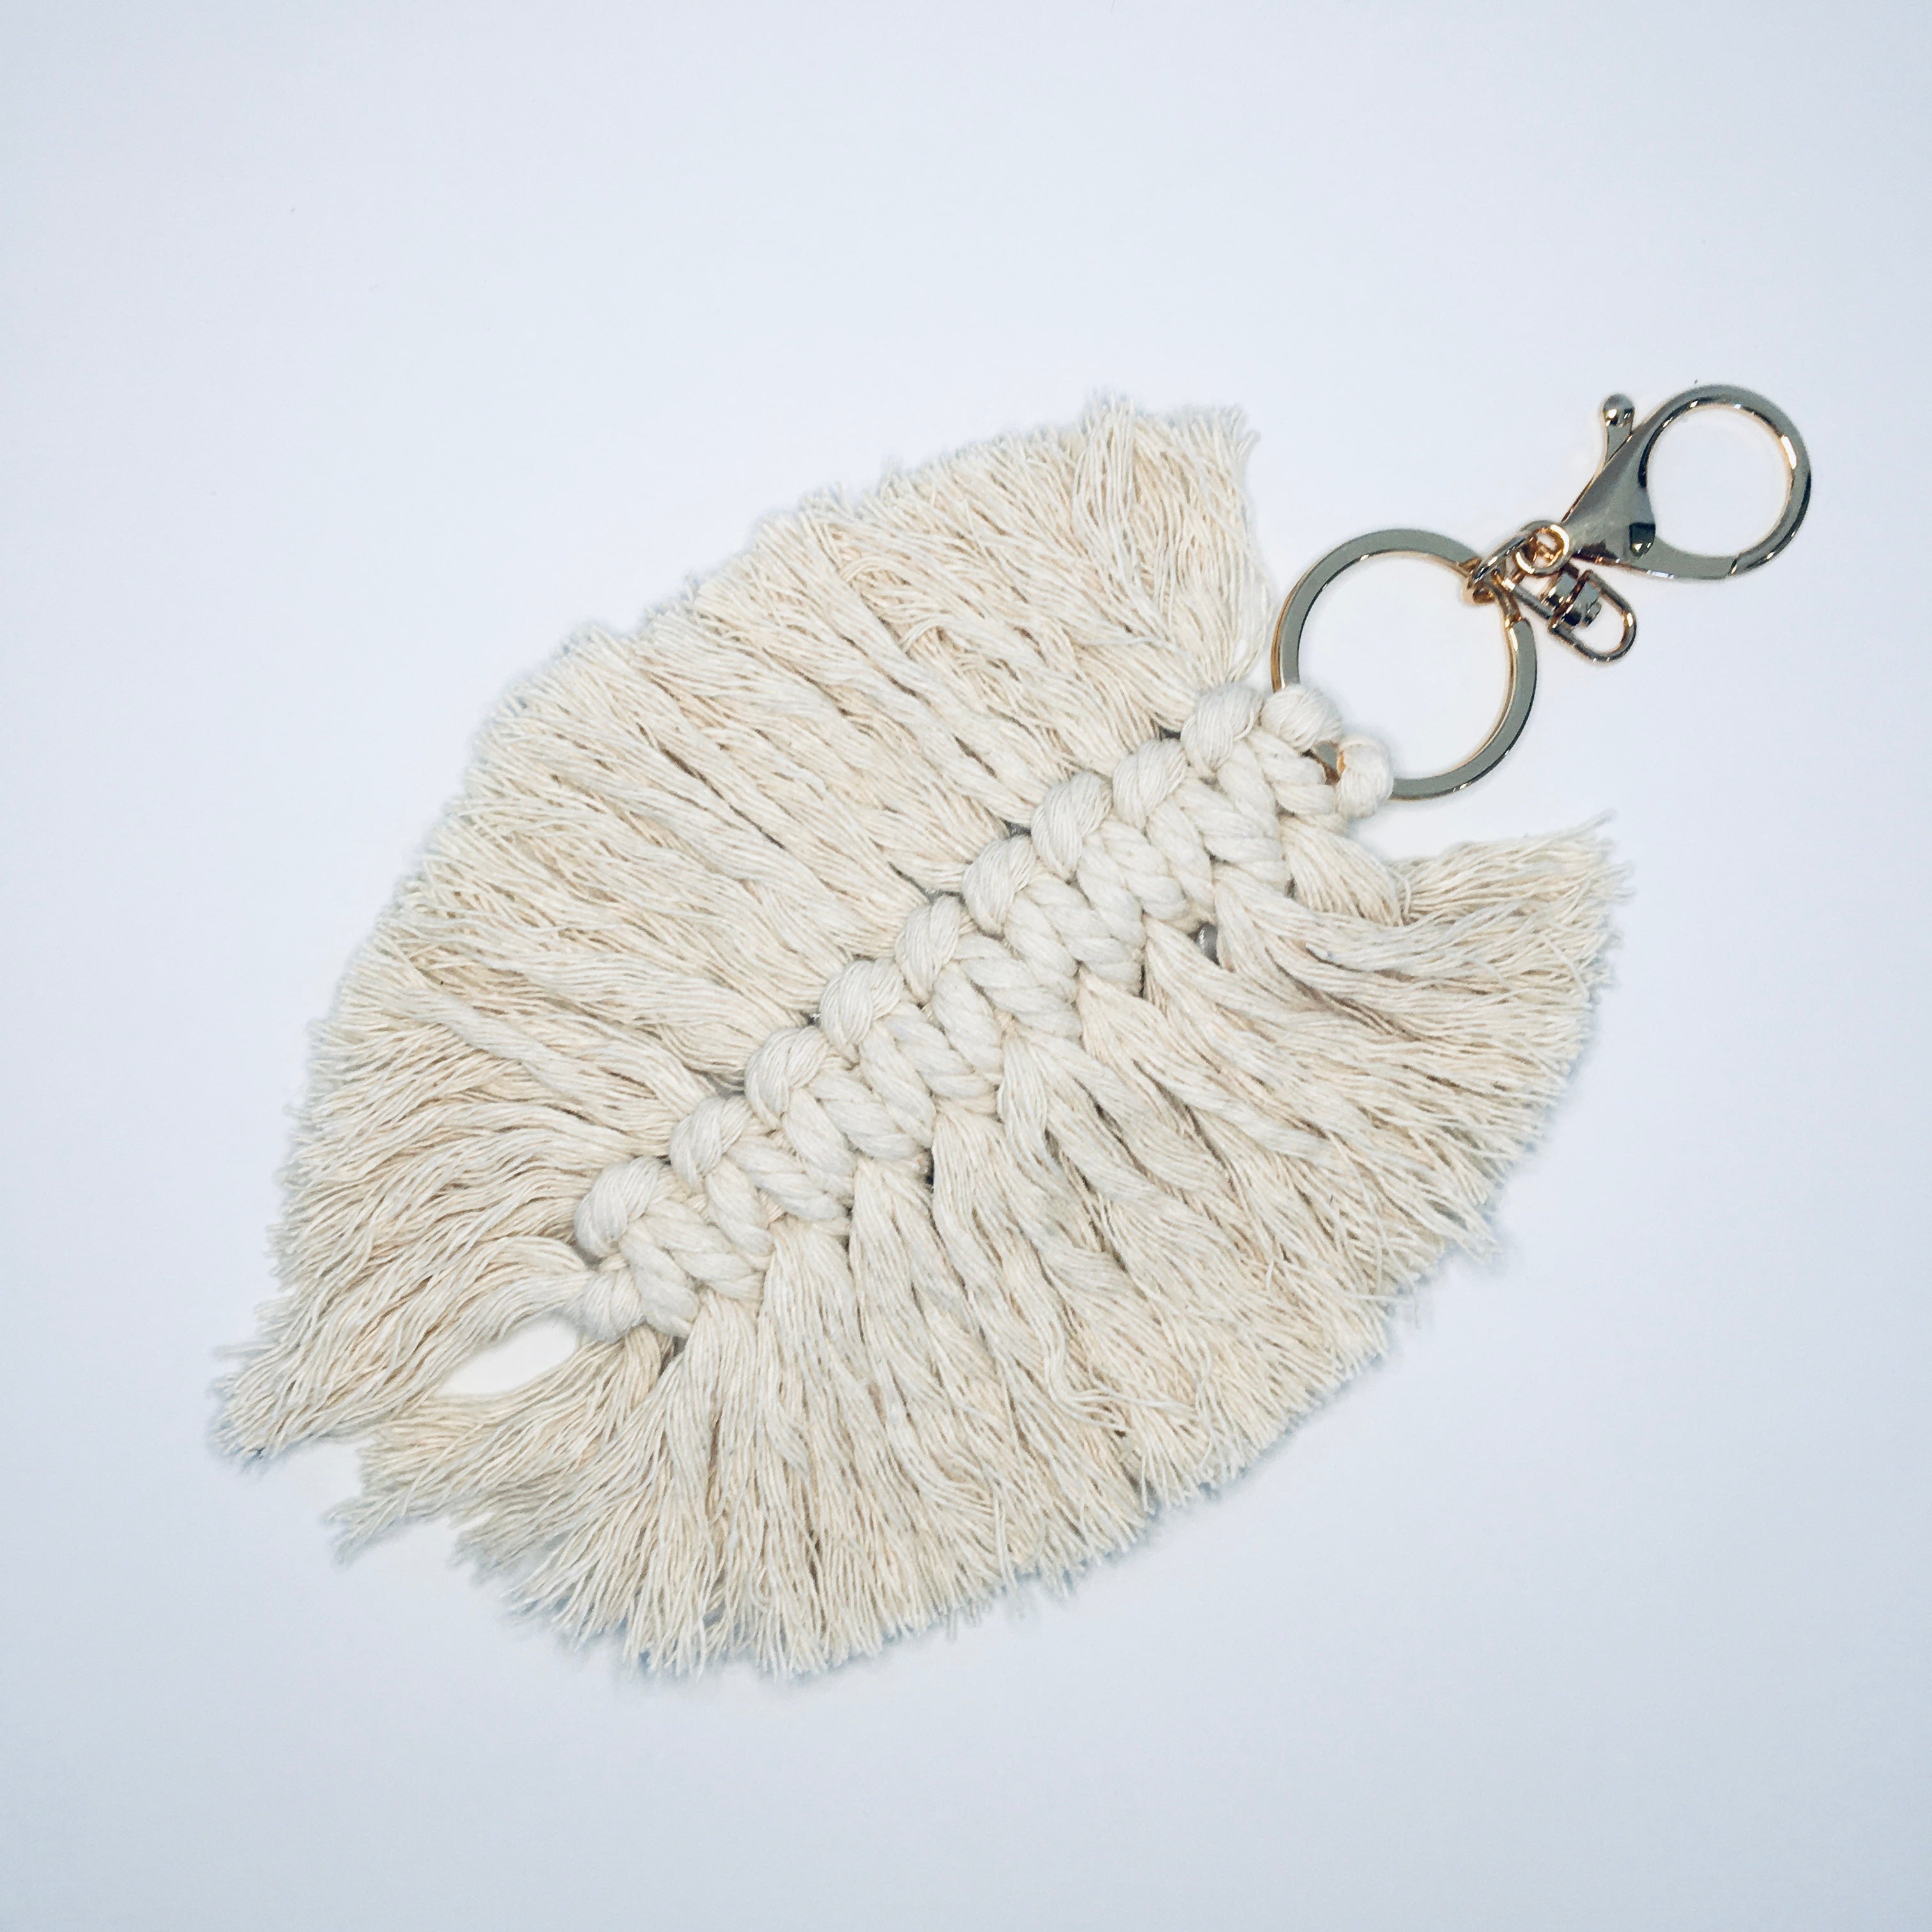 Key Ring - Natural Feather